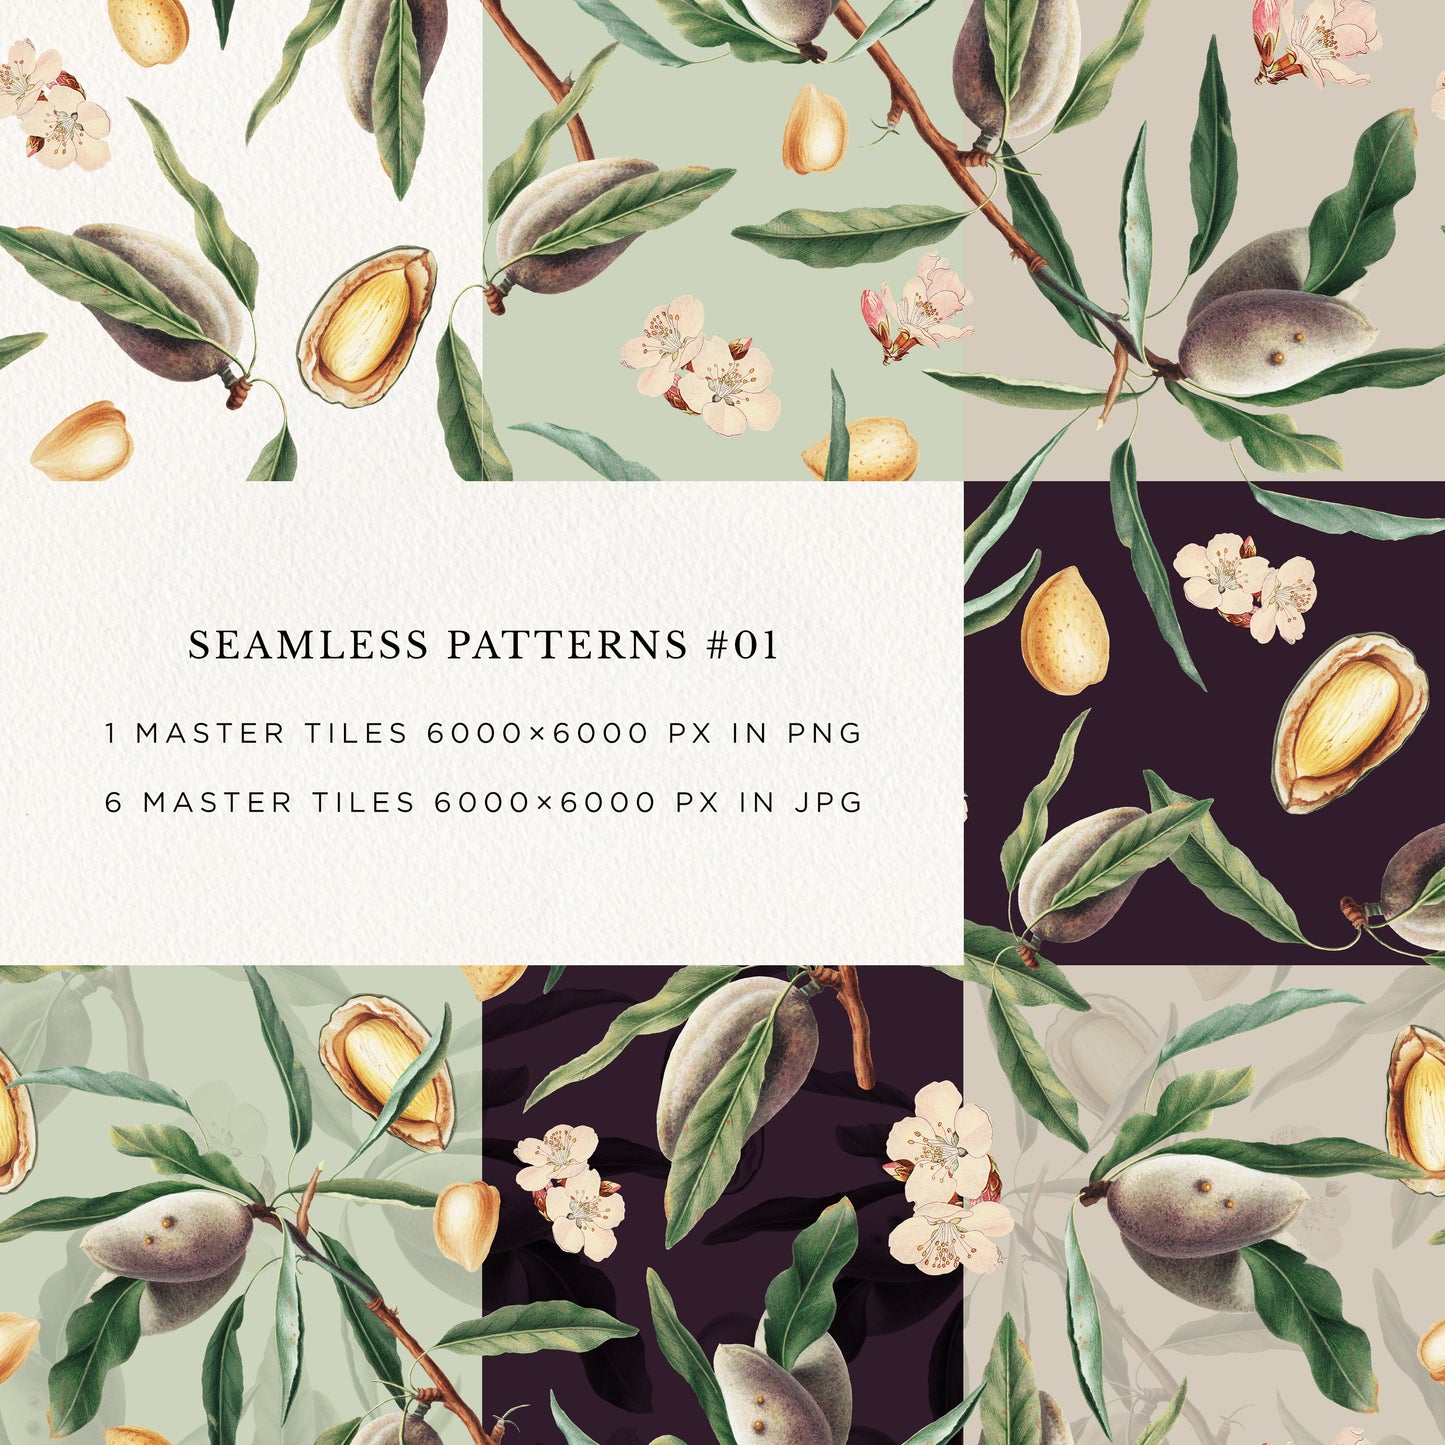 VINTAGE ALMOND Patterns and Elements